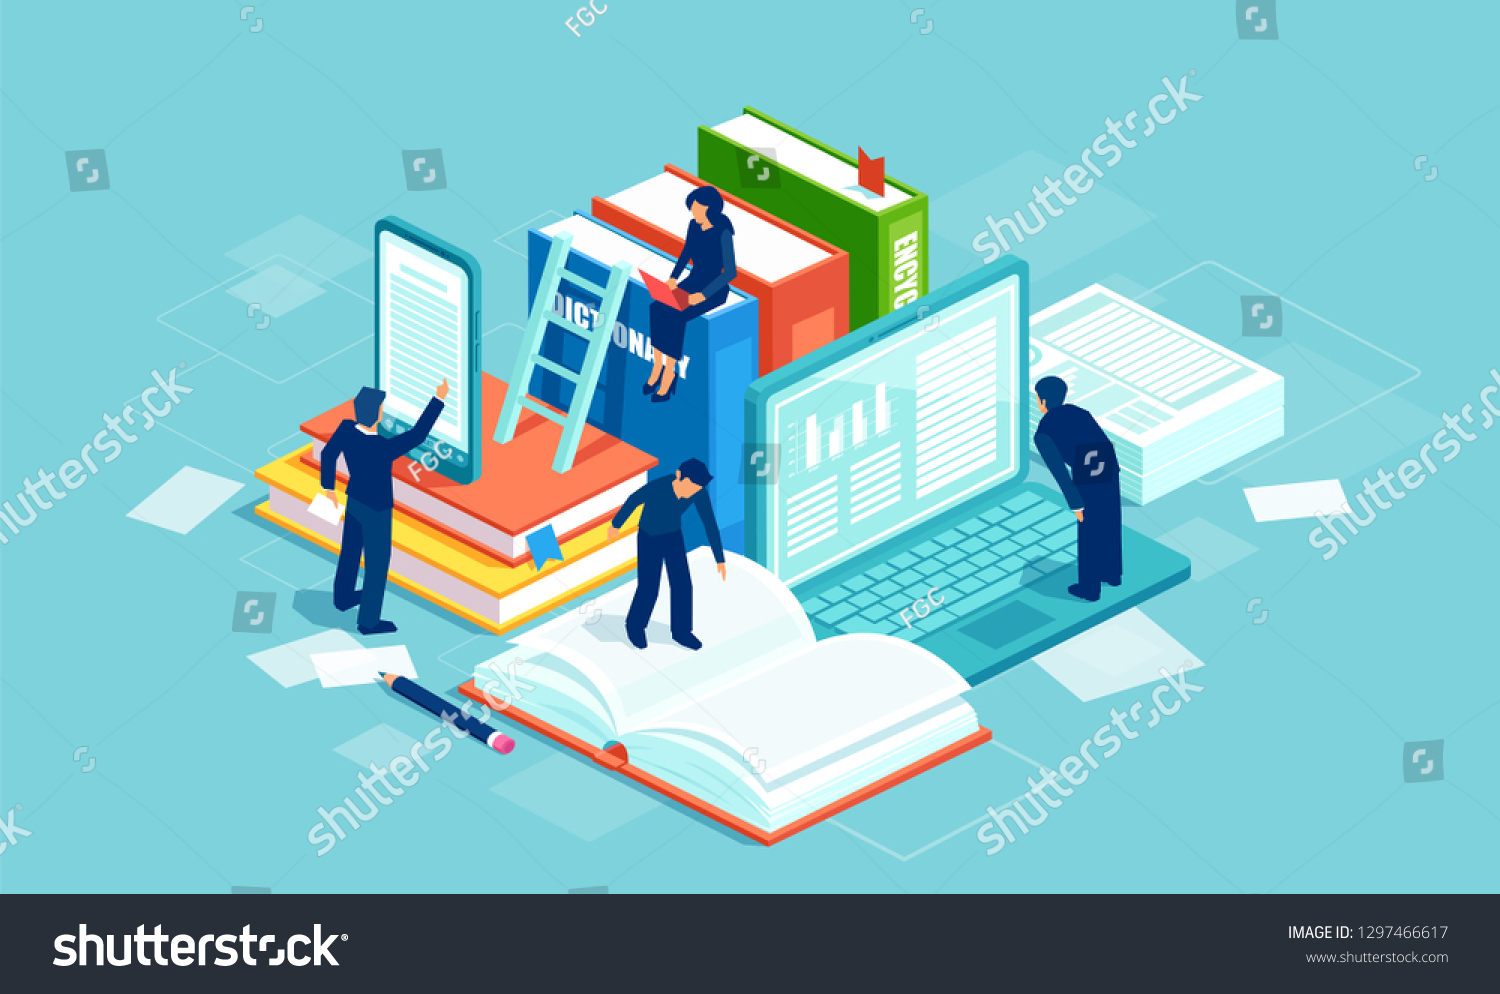 Dictionary, modern library and web archive. Literature and digital culture. Vector of people reading books using modern technology.  #1297466617